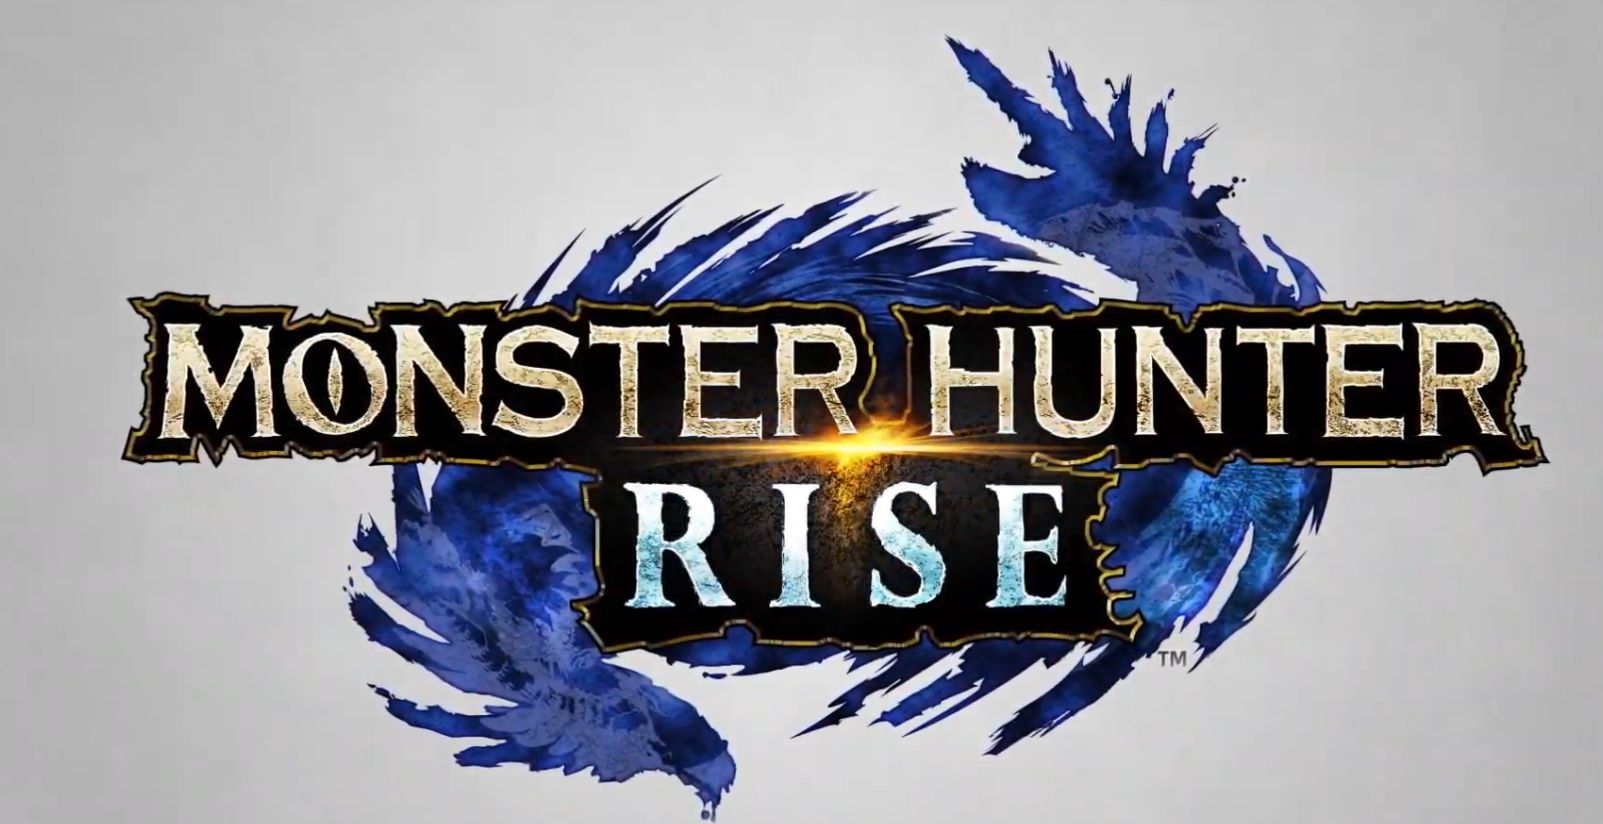 Image for Monster Hunter Rise PC demo now available on Steam